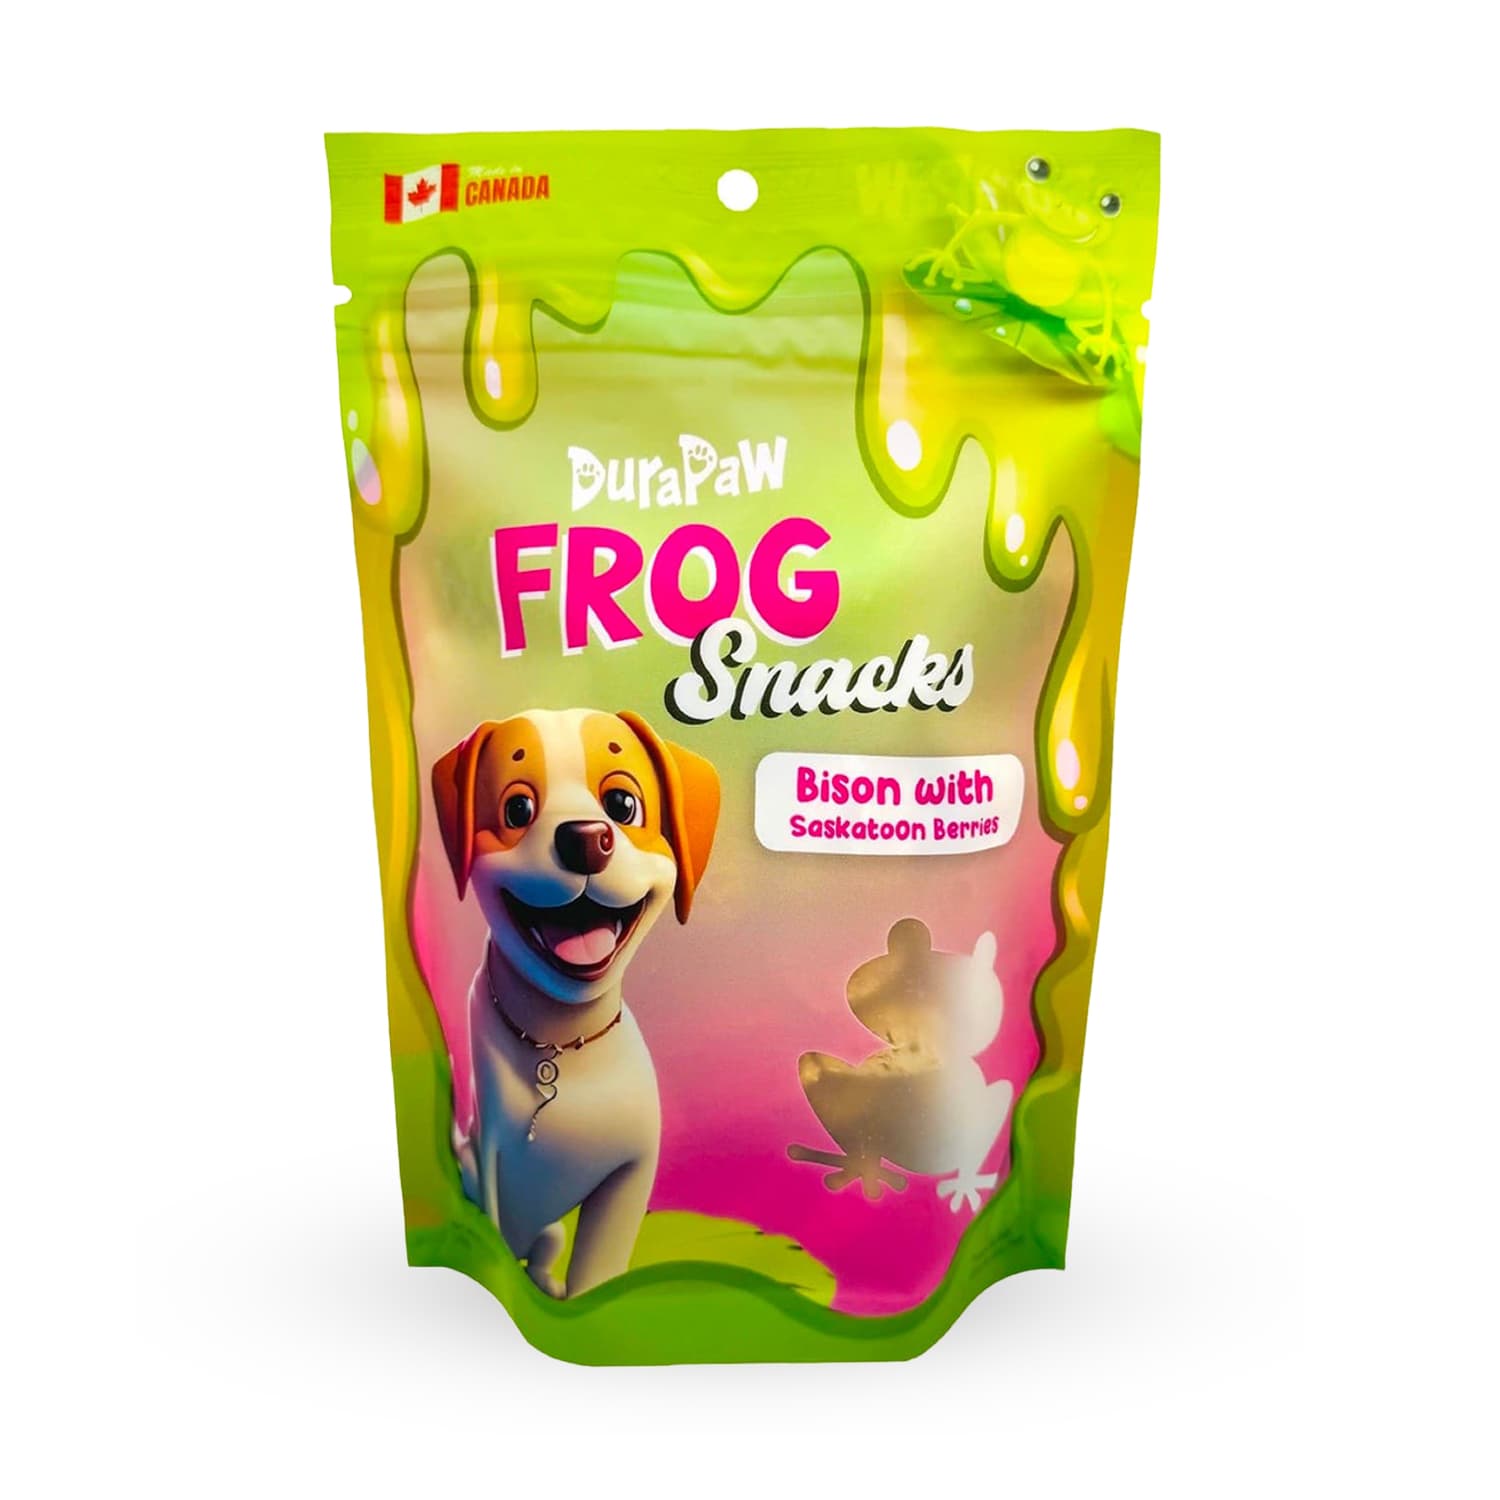 DuraPaw Canadian Dog Treats Frog Snacks Bison with Berries